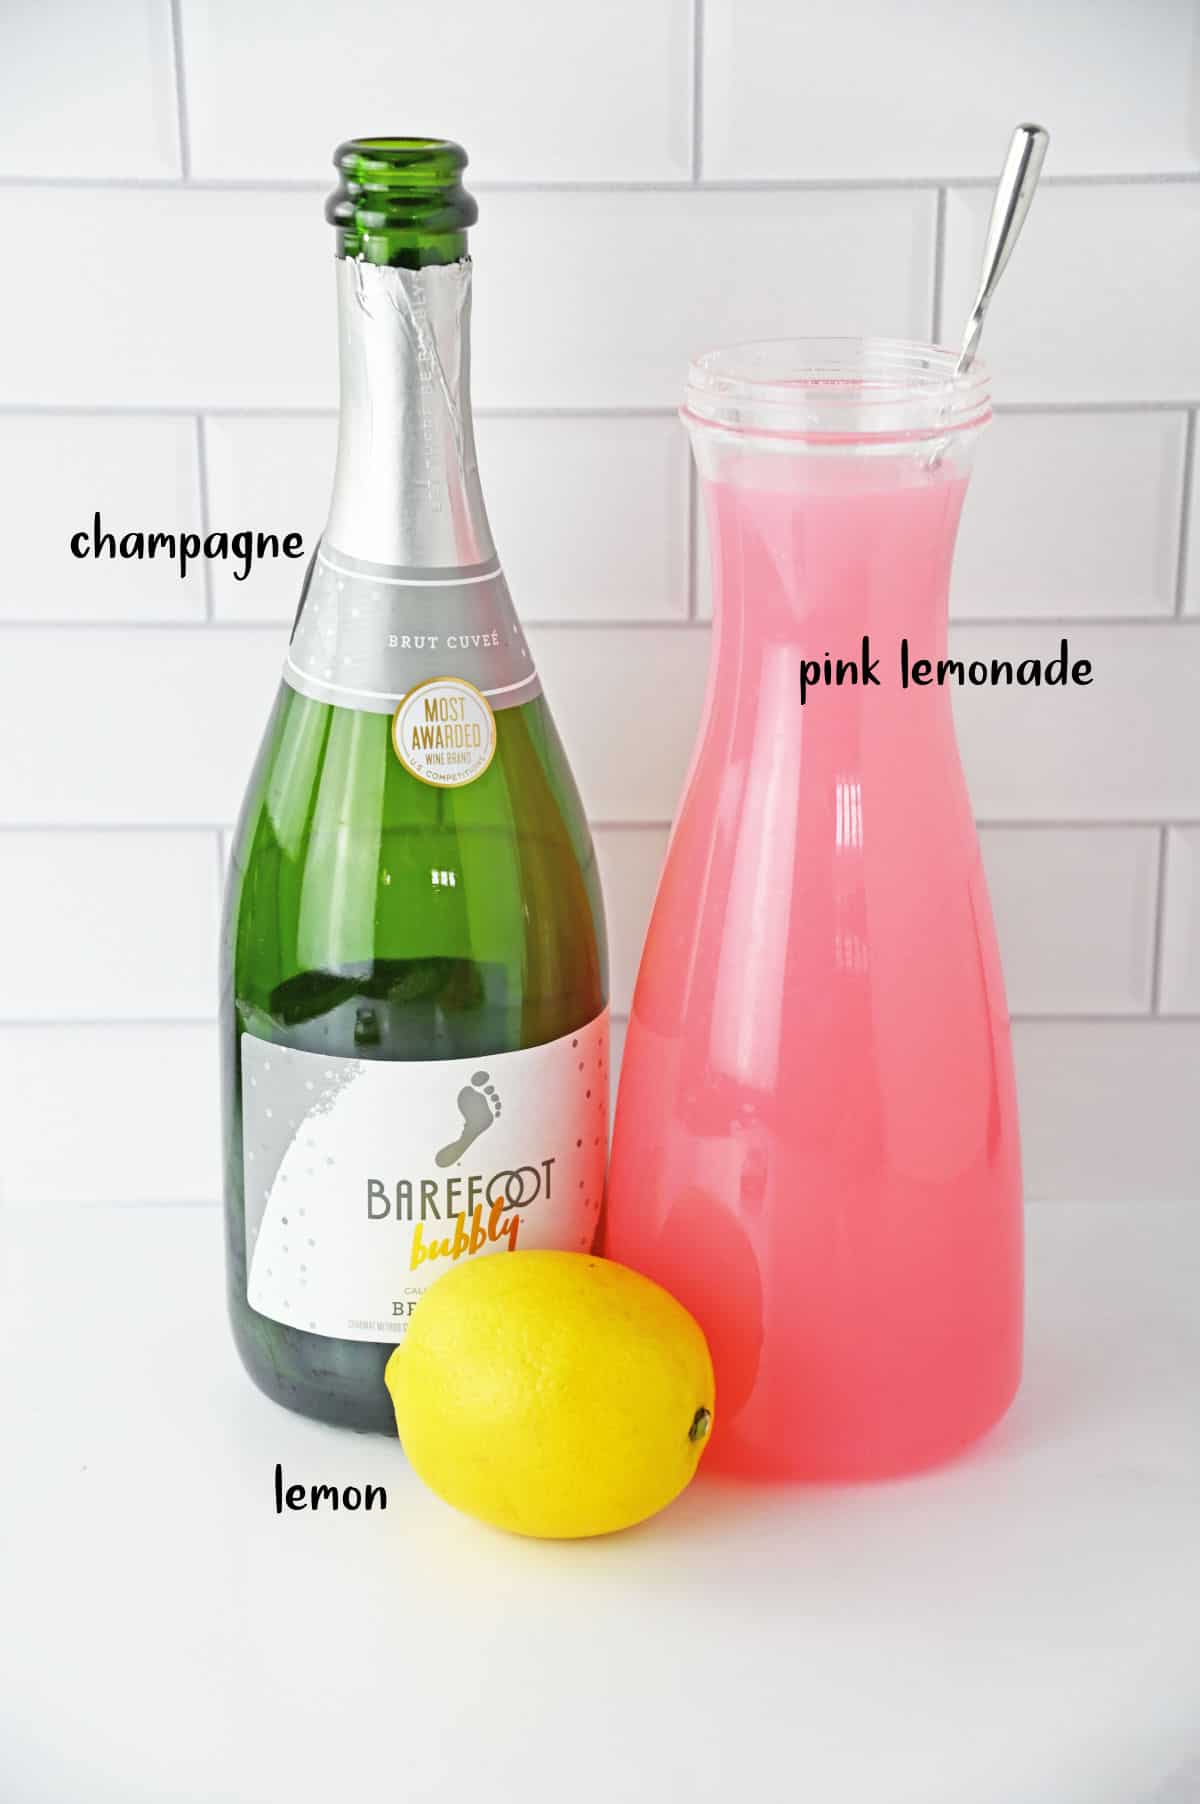 Bottle of champagne, jug of pink lemonade, and a lemon on a white counter.